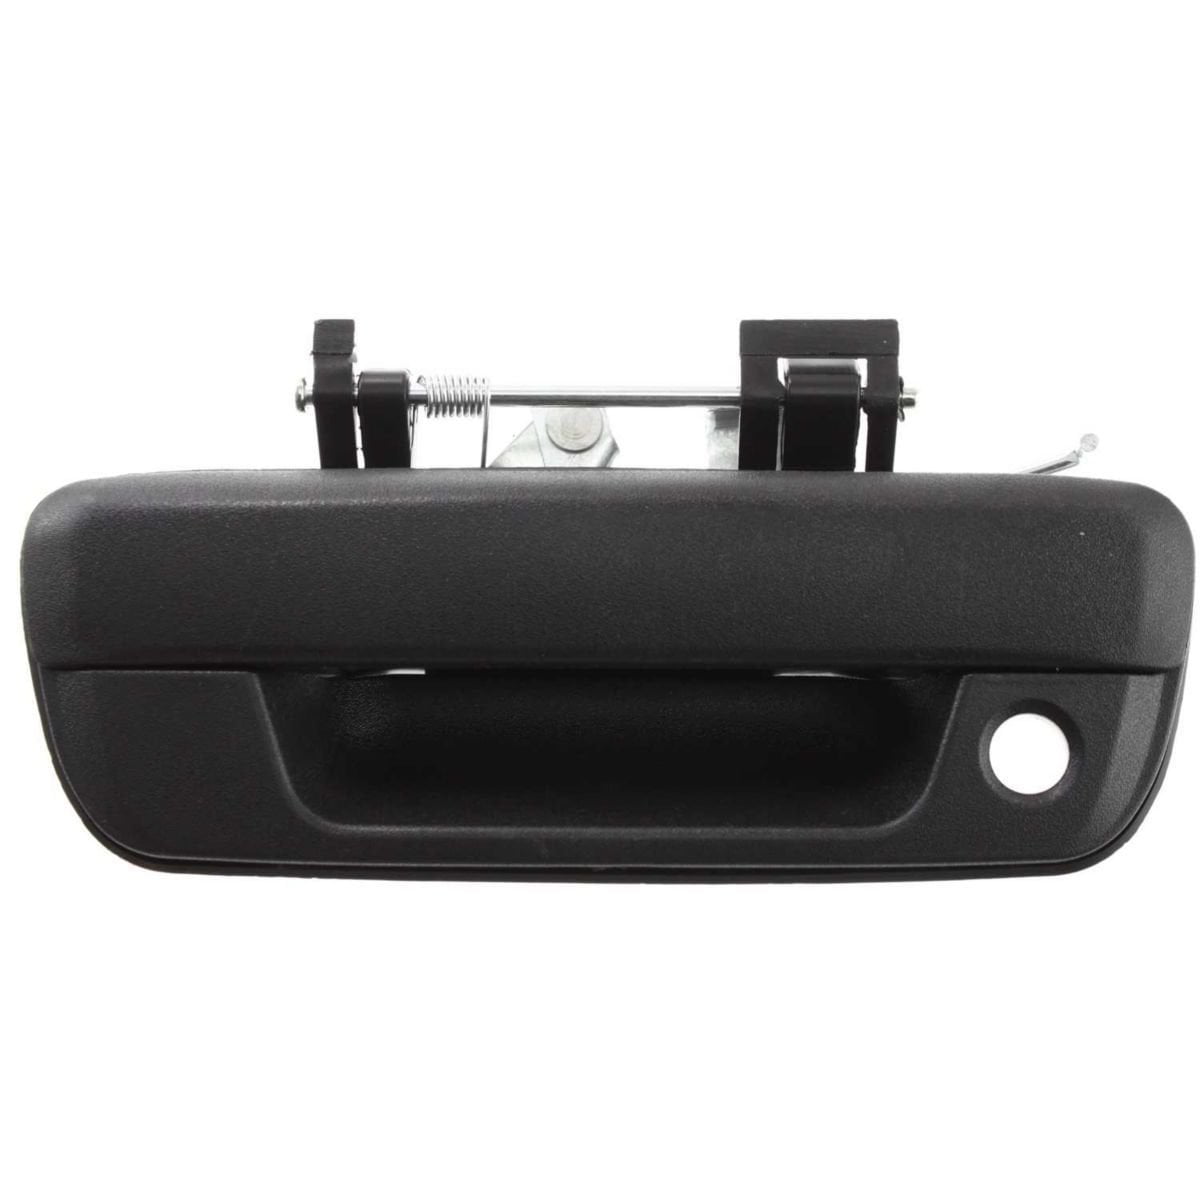 New Tailgate Handle Outer Textured black Chevy i-370 GMC GM1915118 25801998 Diften 170-A0051-X01